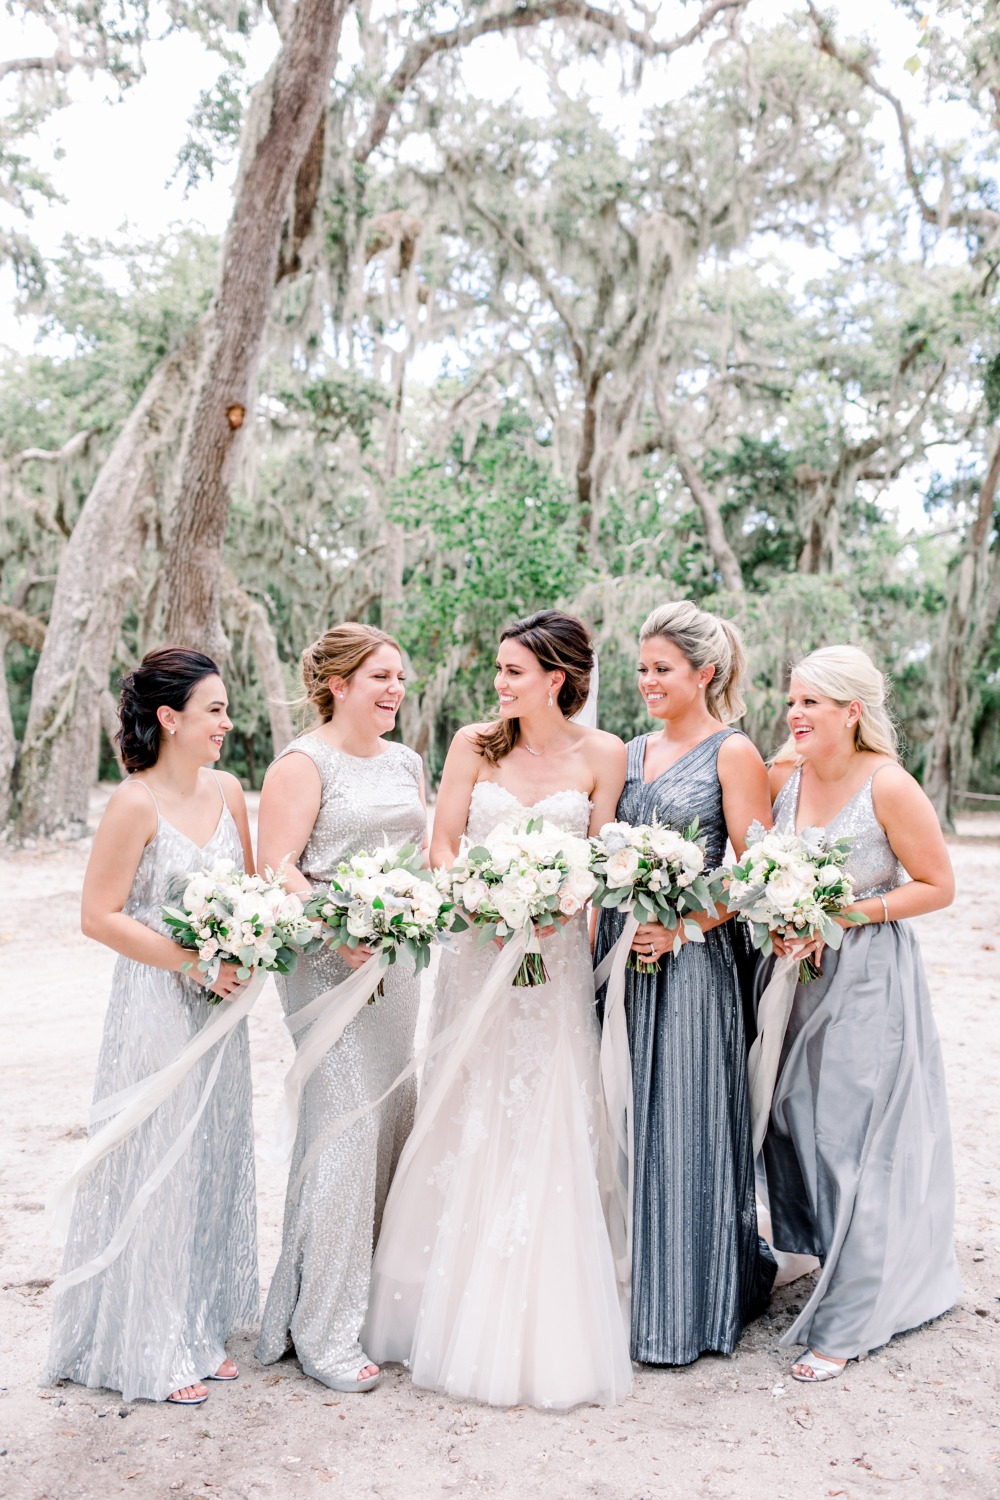 Bridesmaids shimmer in silver